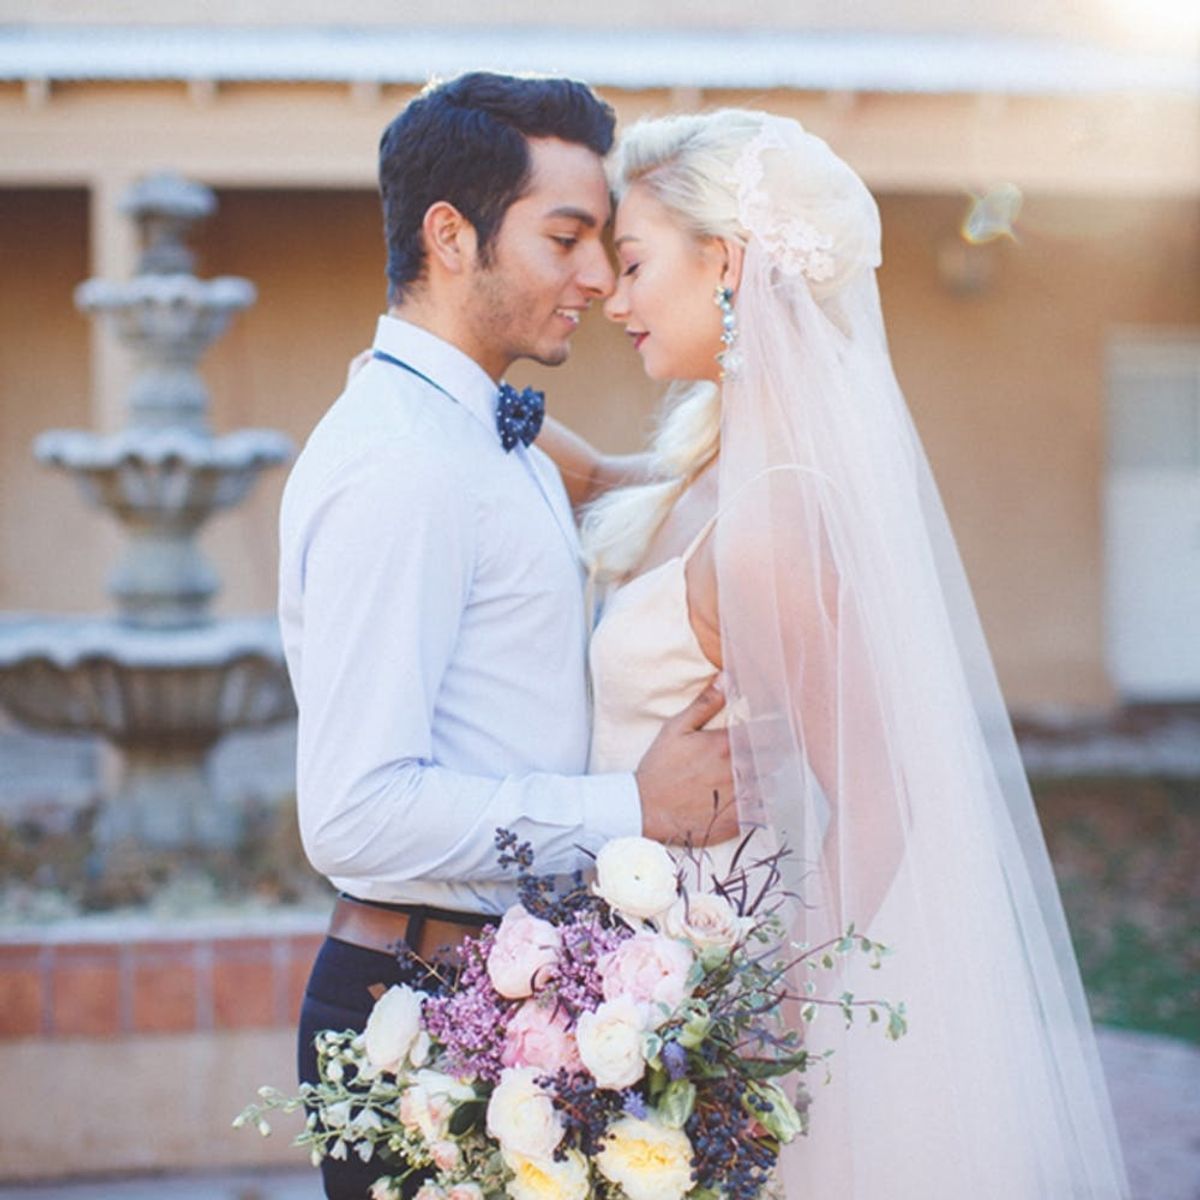 Get *Totally* Inspired With This Rose Quartz and Serenity Wedding Shoot